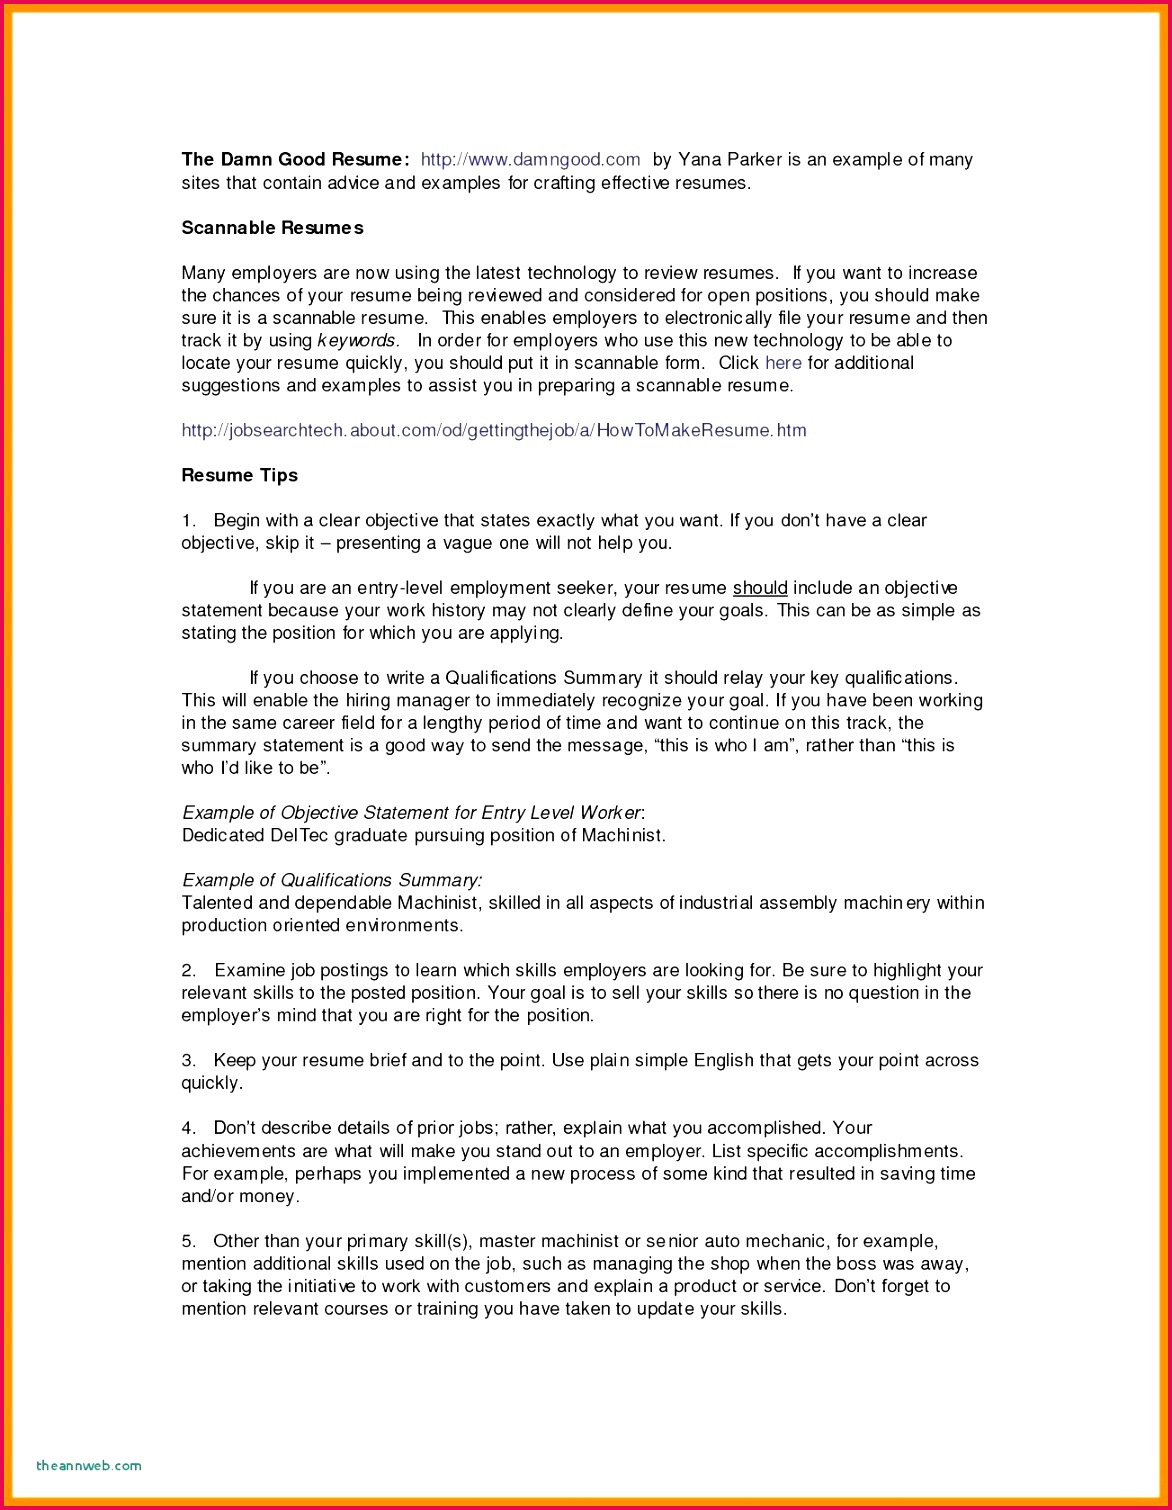 awards and achievements in resume example new resume sample nursing job new nursing award certificate templates of awards and achievements in resume example